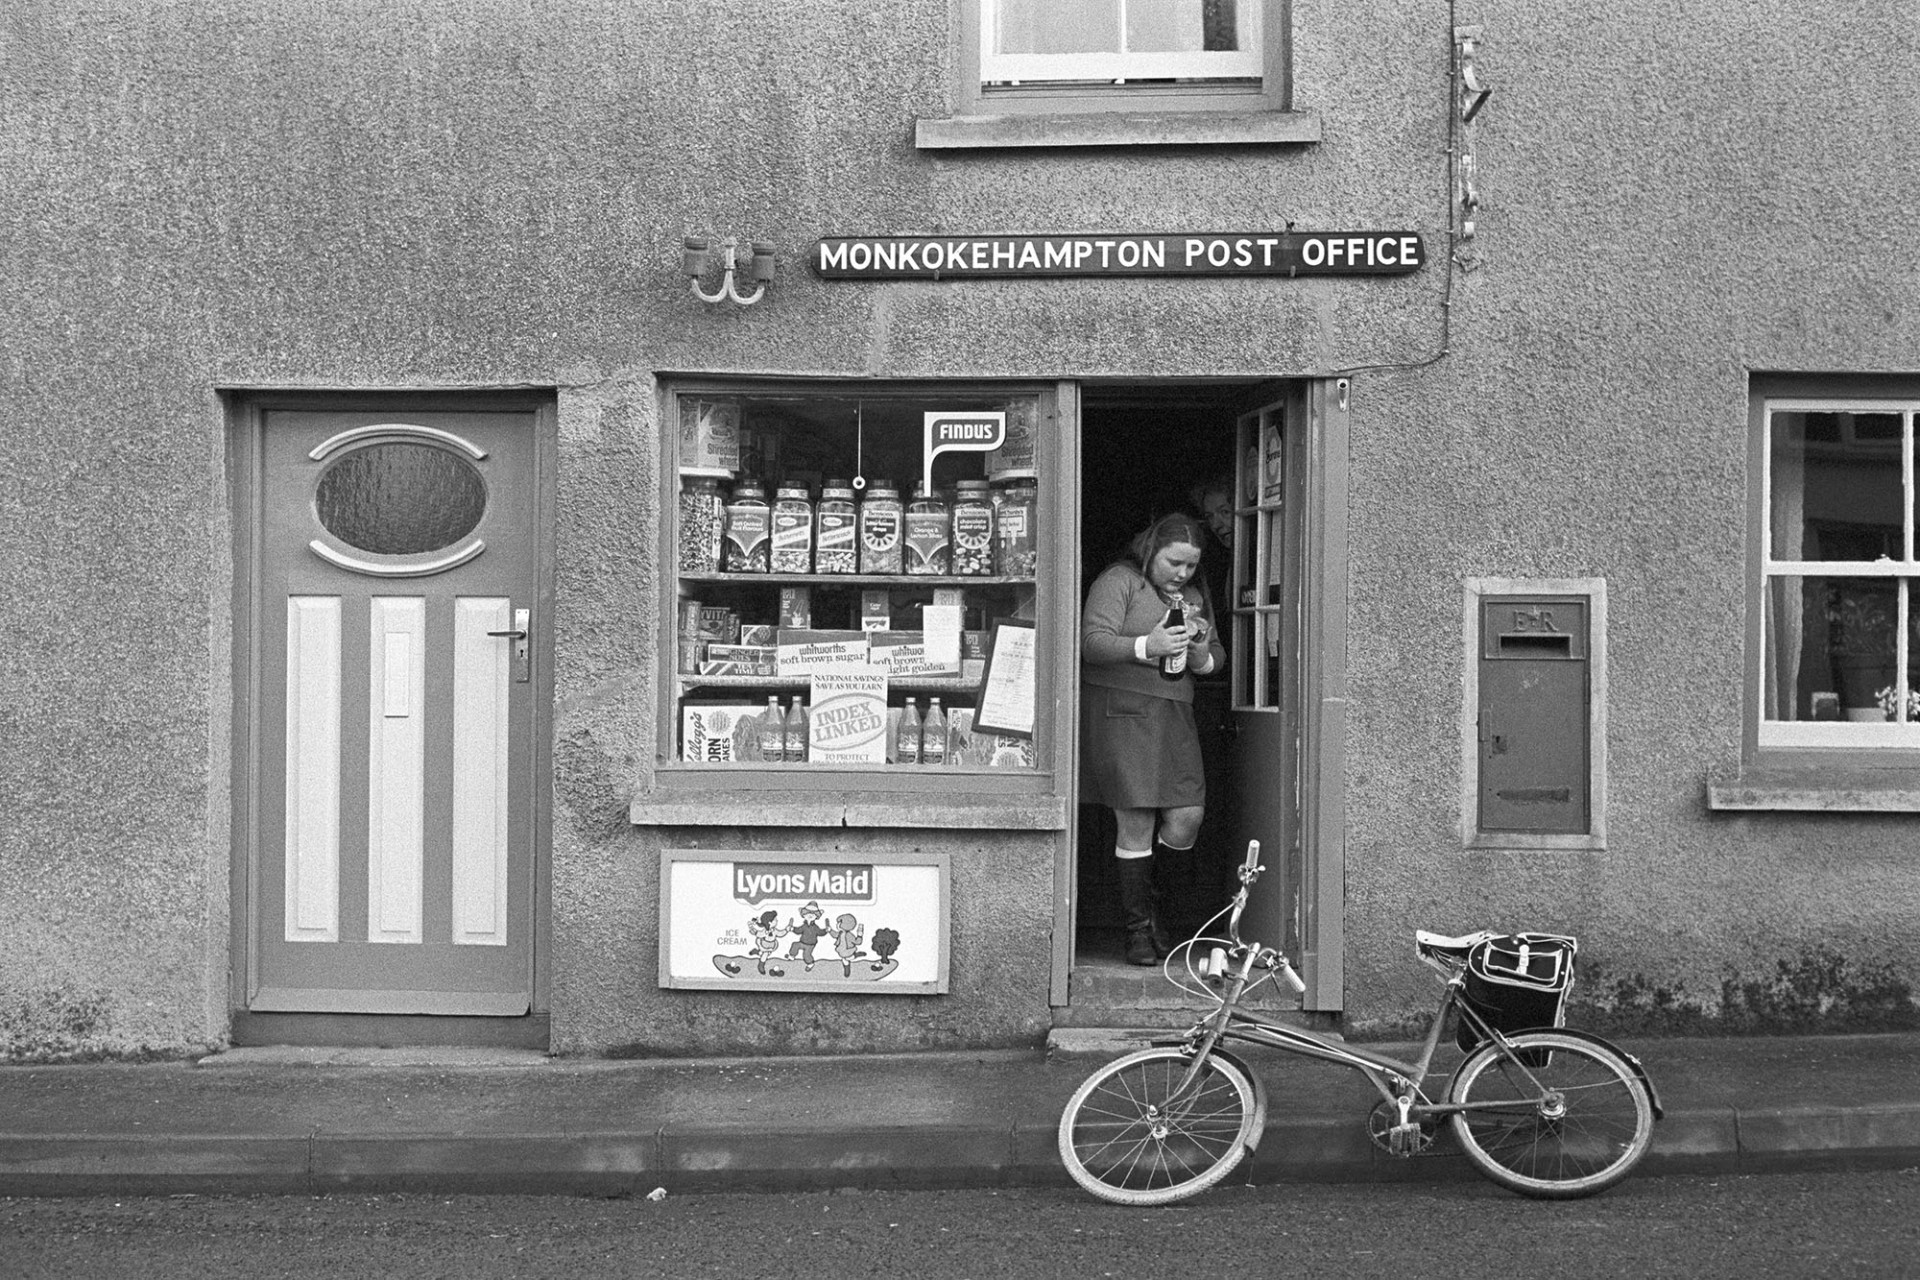 Girl leaving sweetshop to cycle home with sweets!
[A girl leaving Monkokehampton Post Office, with sweets. Her bicycle is leaning against the kerb. A display of sweet jars is visible in the Post Office window and a postbox is to the right of the shop door.]